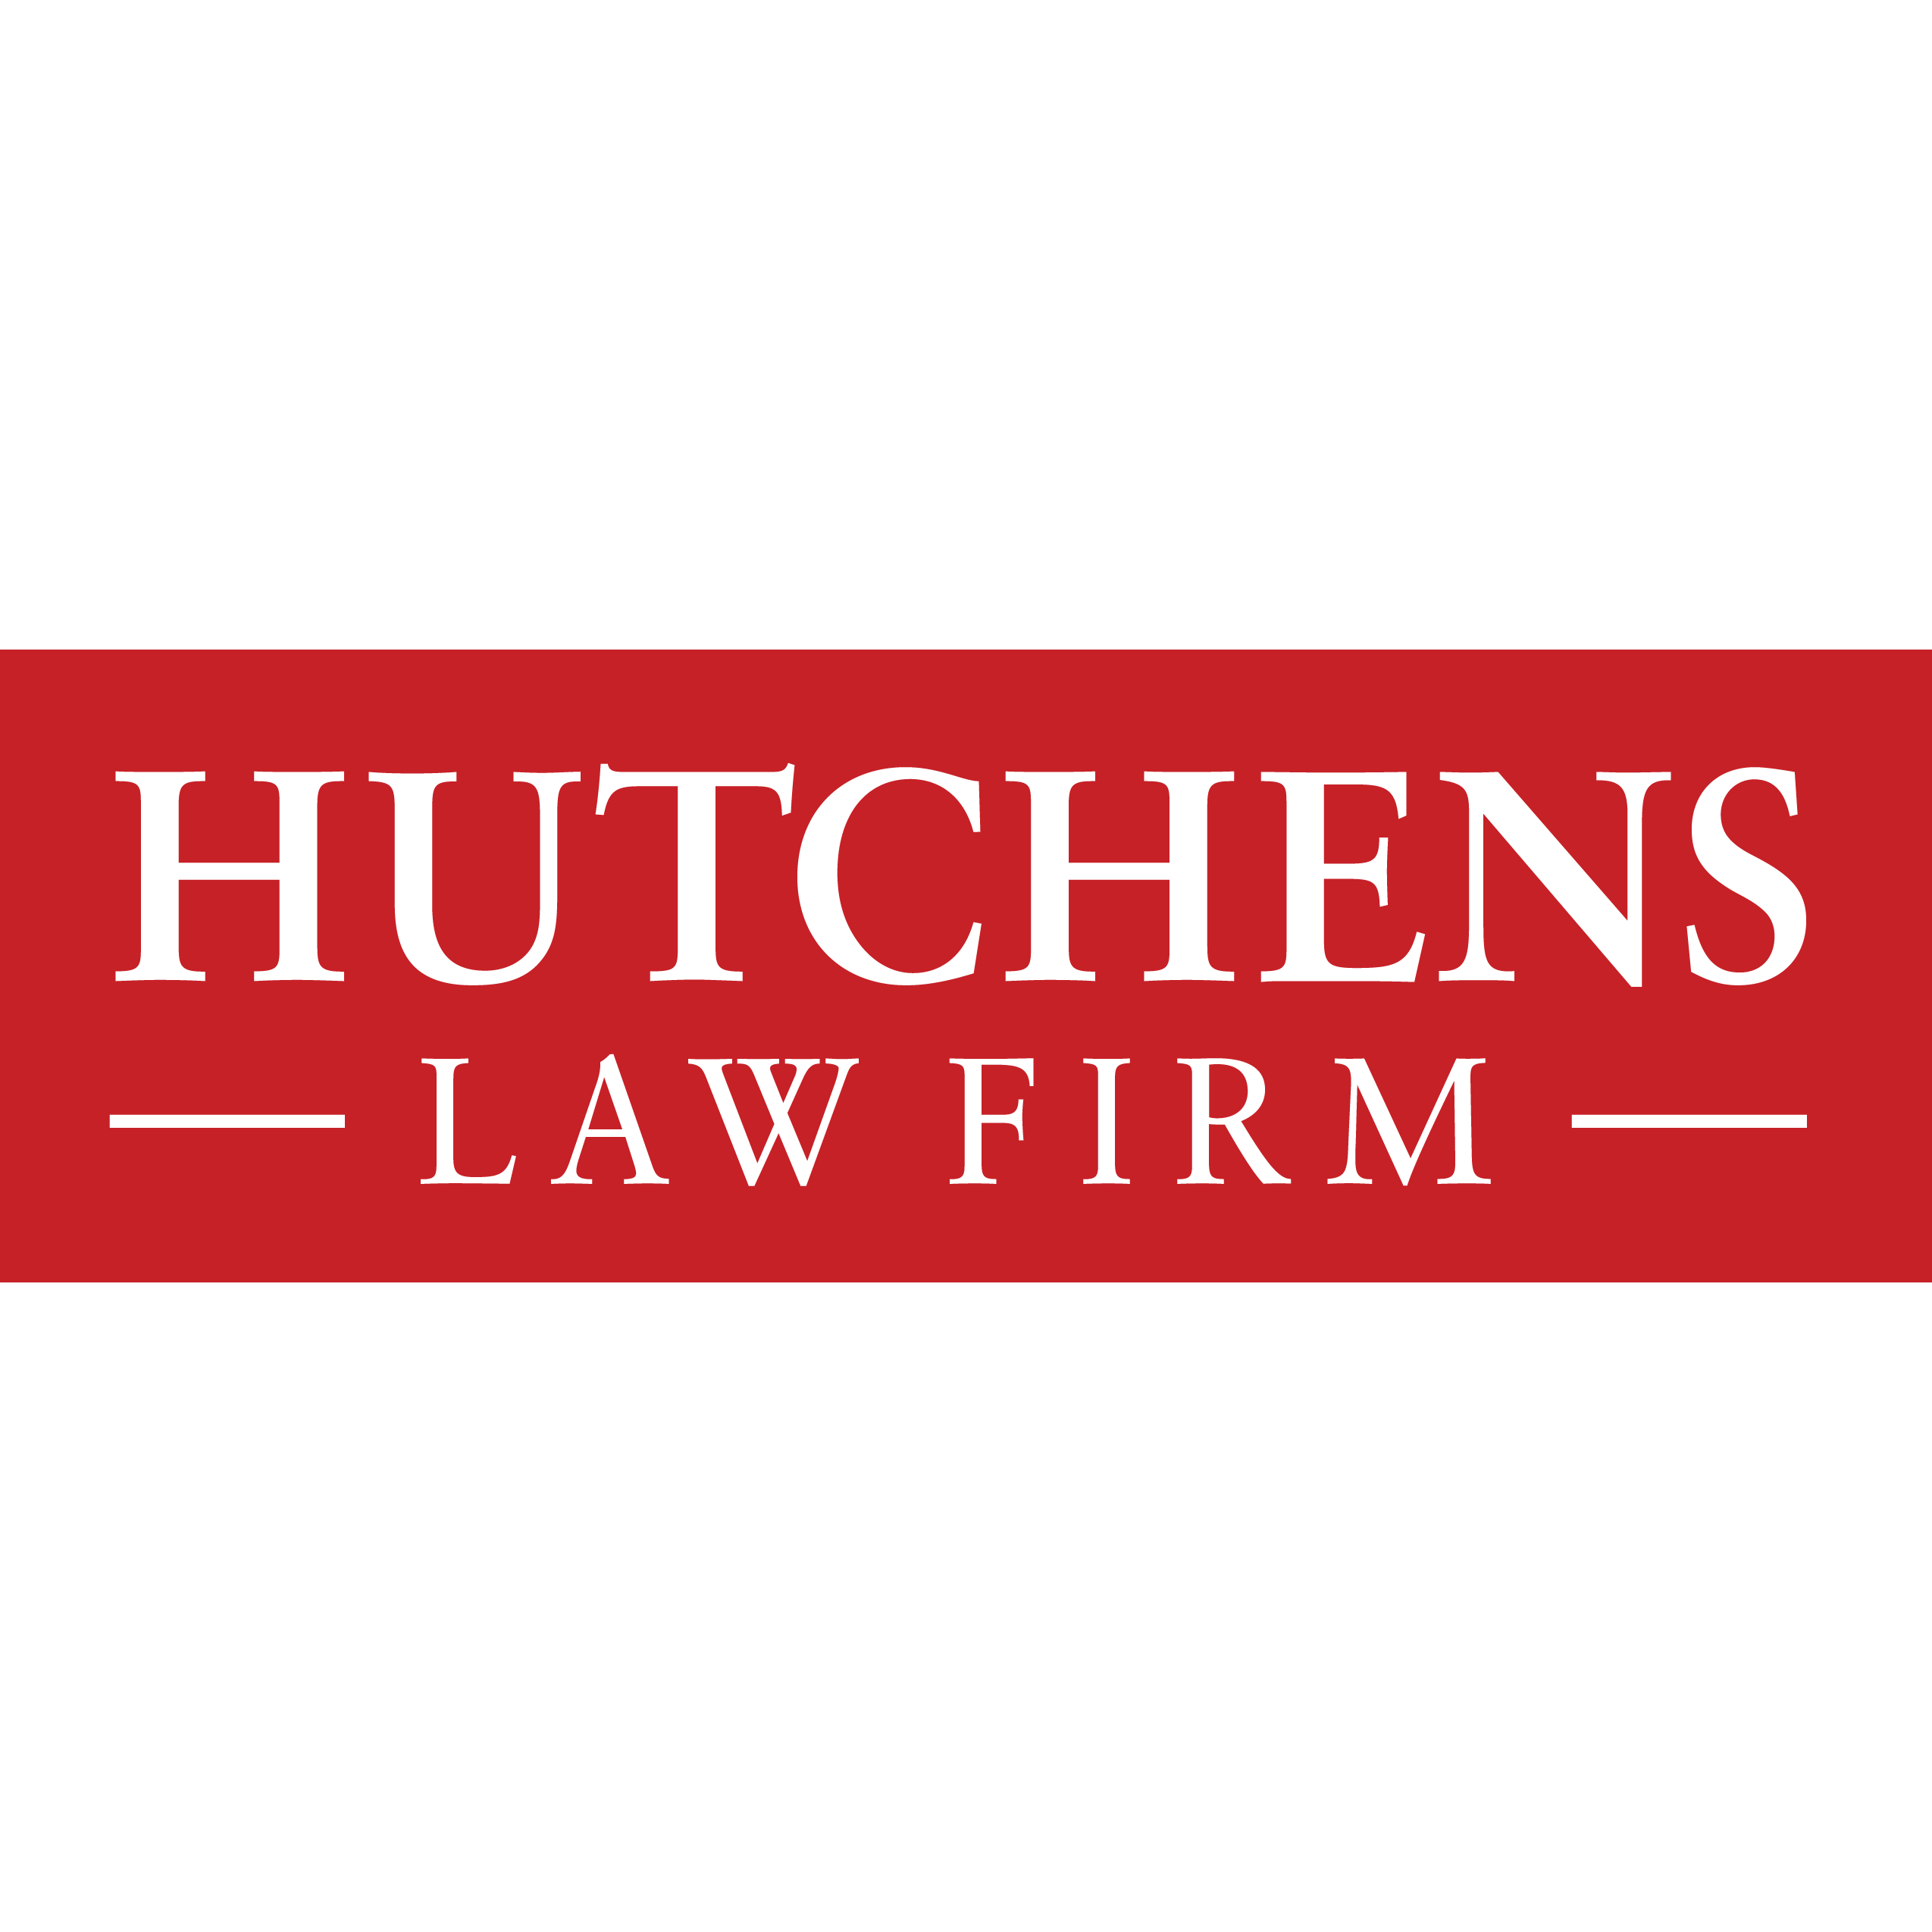 Hutchens Law Firm